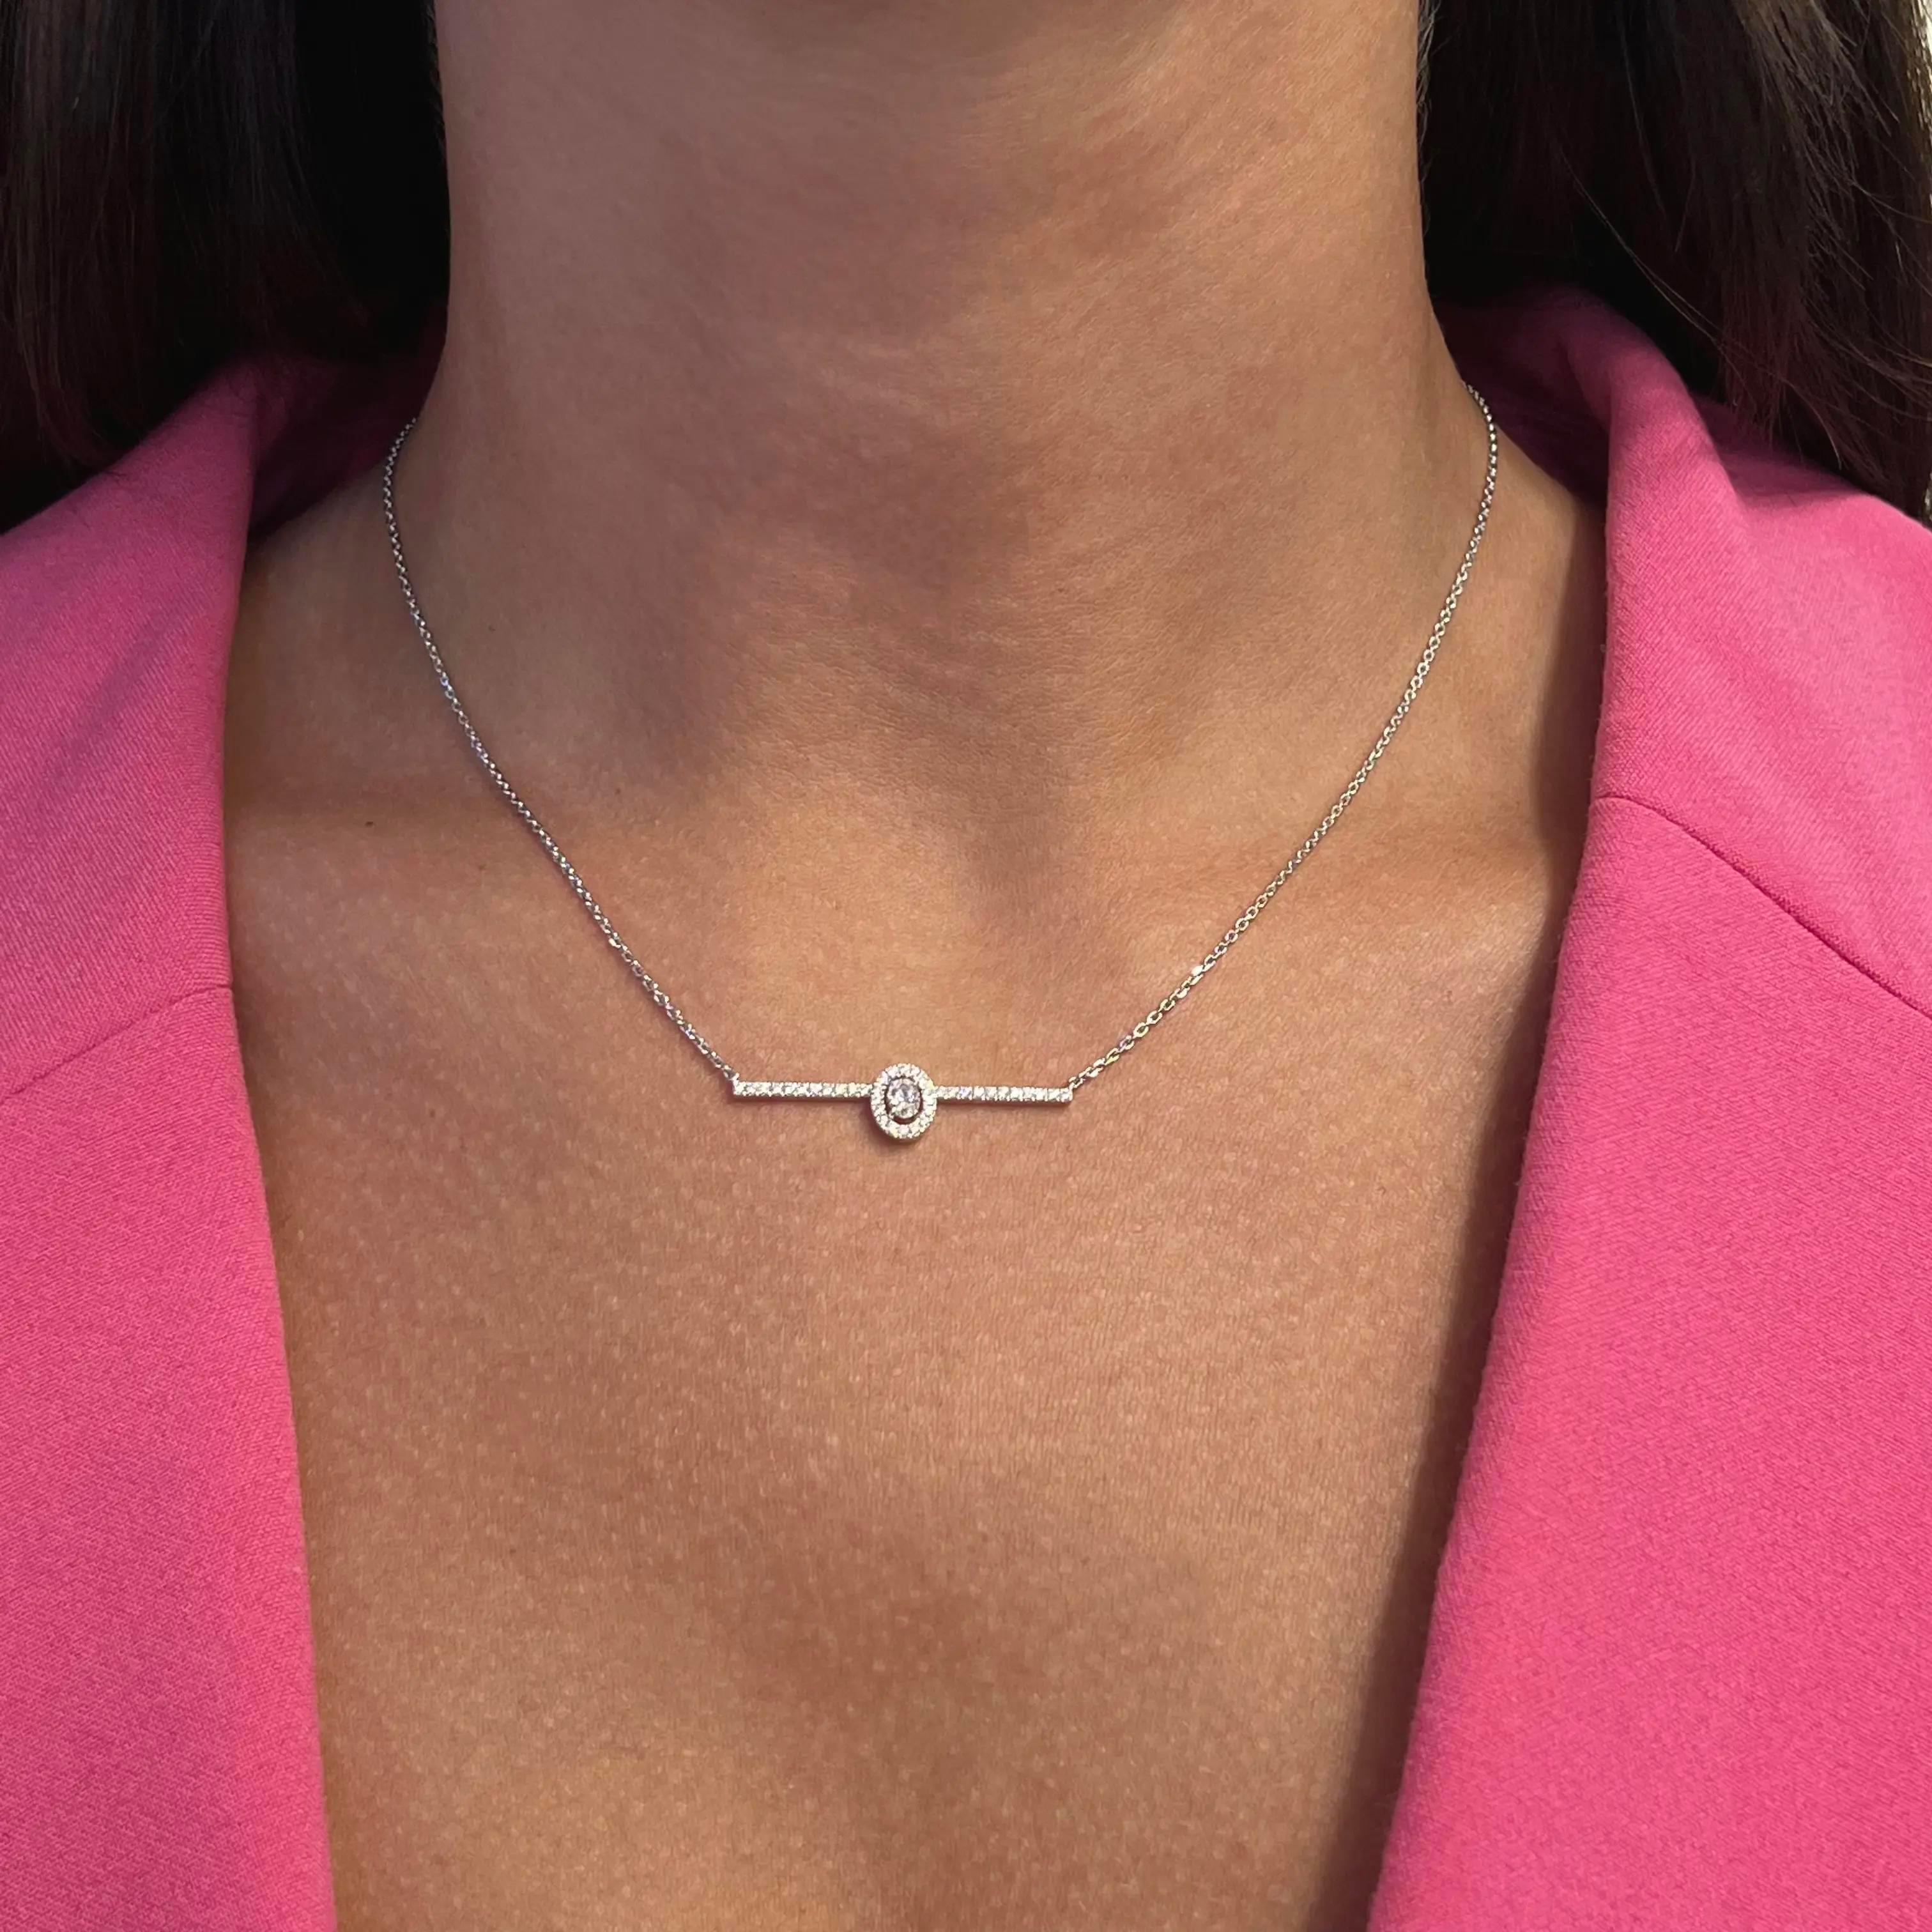 Messika 0.36Cttw Glam'Azone Diamond Chain Necklace 18K White Gold 18.5 Inches  Neuf - En vente à New York, NY